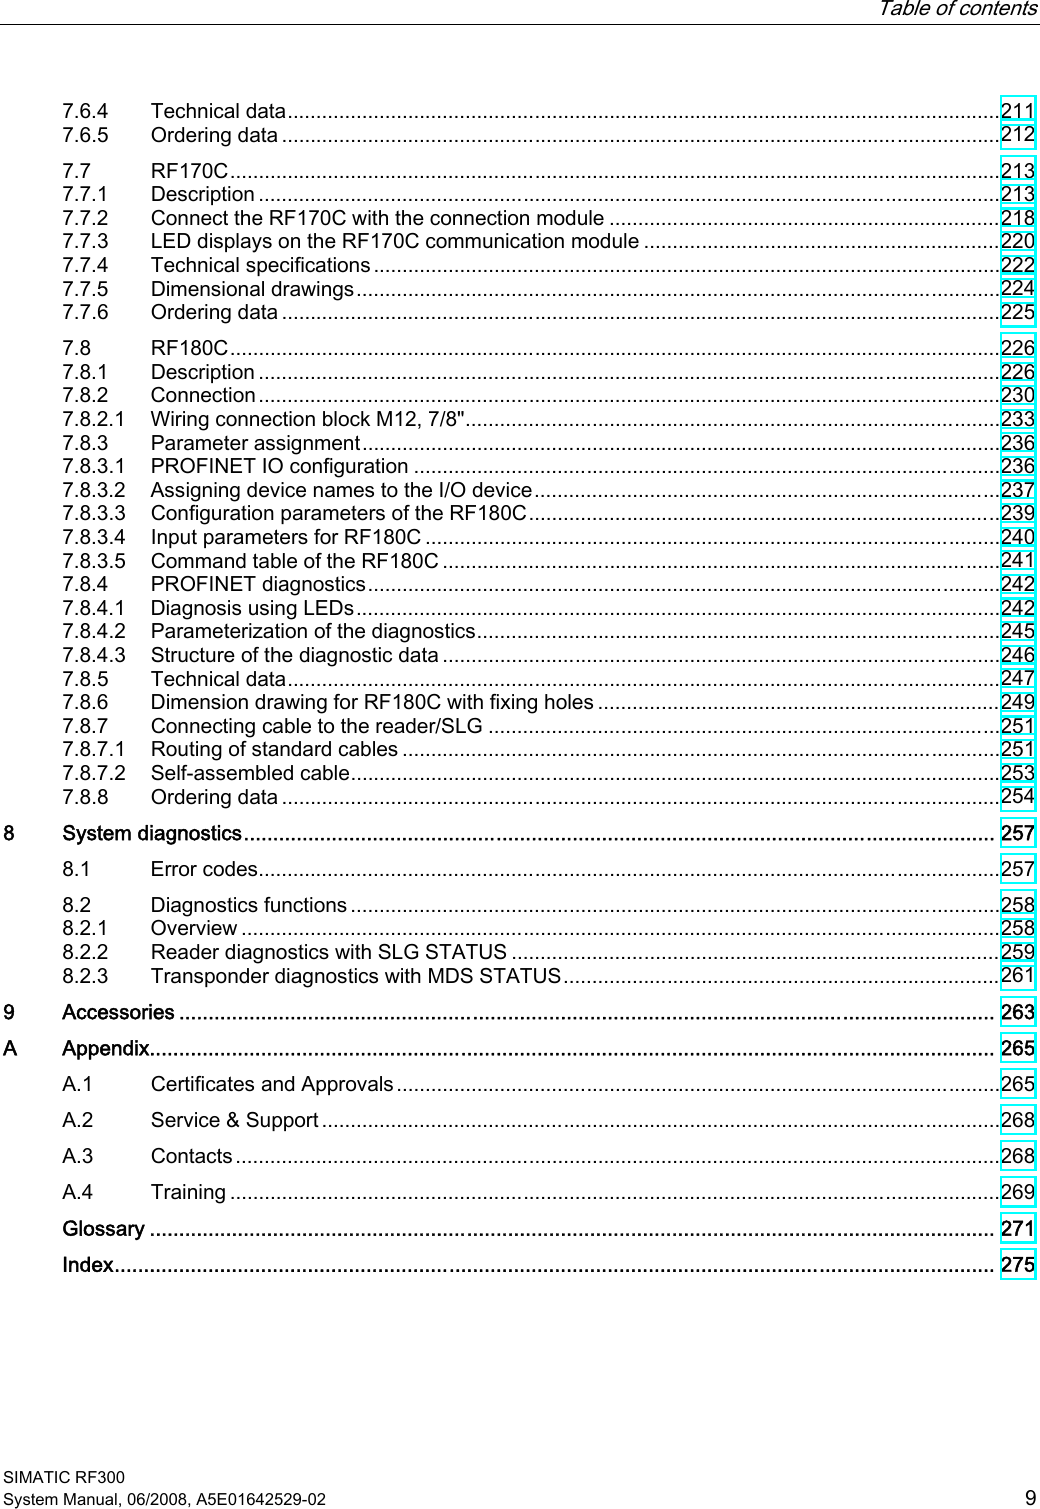   Table of contents   SIMATIC RF300 System Manual, 06/2008, A5E01642529-02  9 7.6.4  Technical data............................................................................................................................211 7.6.5  Ordering data .............................................................................................................................212 7.7  RF170C......................................................................................................................................213 7.7.1  Description .................................................................................................................................213 7.7.2  Connect the RF170C with the connection module ....................................................................218 7.7.3  LED displays on the RF170C communication module ..............................................................220 7.7.4  Technical specifications .............................................................................................................222 7.7.5  Dimensional drawings................................................................................................................224 7.7.6  Ordering data .............................................................................................................................225 7.8  RF180C......................................................................................................................................226 7.8.1  Description .................................................................................................................................226 7.8.2  Connection.................................................................................................................................230 7.8.2.1  Wiring connection block M12, 7/8&quot;.............................................................................................233 7.8.3  Parameter assignment...............................................................................................................236 7.8.3.1  PROFINET IO configuration ......................................................................................................236 7.8.3.2  Assigning device names to the I/O device.................................................................................237 7.8.3.3  Configuration parameters of the RF180C..................................................................................239 7.8.3.4  Input parameters for RF180C ....................................................................................................240 7.8.3.5  Command table of the RF180C .................................................................................................241 7.8.4  PROFINET diagnostics..............................................................................................................242 7.8.4.1  Diagnosis using LEDs................................................................................................................242 7.8.4.2  Parameterization of the diagnostics...........................................................................................245 7.8.4.3  Structure of the diagnostic data .................................................................................................246 7.8.5  Technical data............................................................................................................................247 7.8.6  Dimension drawing for RF180C with fixing holes ......................................................................249 7.8.7  Connecting cable to the reader/SLG .........................................................................................251 7.8.7.1  Routing of standard cables ........................................................................................................251 7.8.7.2  Self-assembled cable.................................................................................................................253 7.8.8  Ordering data .............................................................................................................................254 8  System diagnostics................................................................................................................................ 257 8.1  Error codes.................................................................................................................................257 8.2  Diagnostics functions .................................................................................................................258 8.2.1  Overview ....................................................................................................................................258 8.2.2  Reader diagnostics with SLG STATUS .....................................................................................259 8.2.3  Transponder diagnostics with MDS STATUS............................................................................261 9  Accessories ........................................................................................................................................... 263 A  Appendix................................................................................................................................................ 265 A.1  Certificates and Approvals.........................................................................................................265 A.2  Service &amp; Support ......................................................................................................................268 A.3  Contacts.....................................................................................................................................268 A.4  Training ......................................................................................................................................269   Glossary ................................................................................................................................................ 271   Index...................................................................................................................................................... 275 